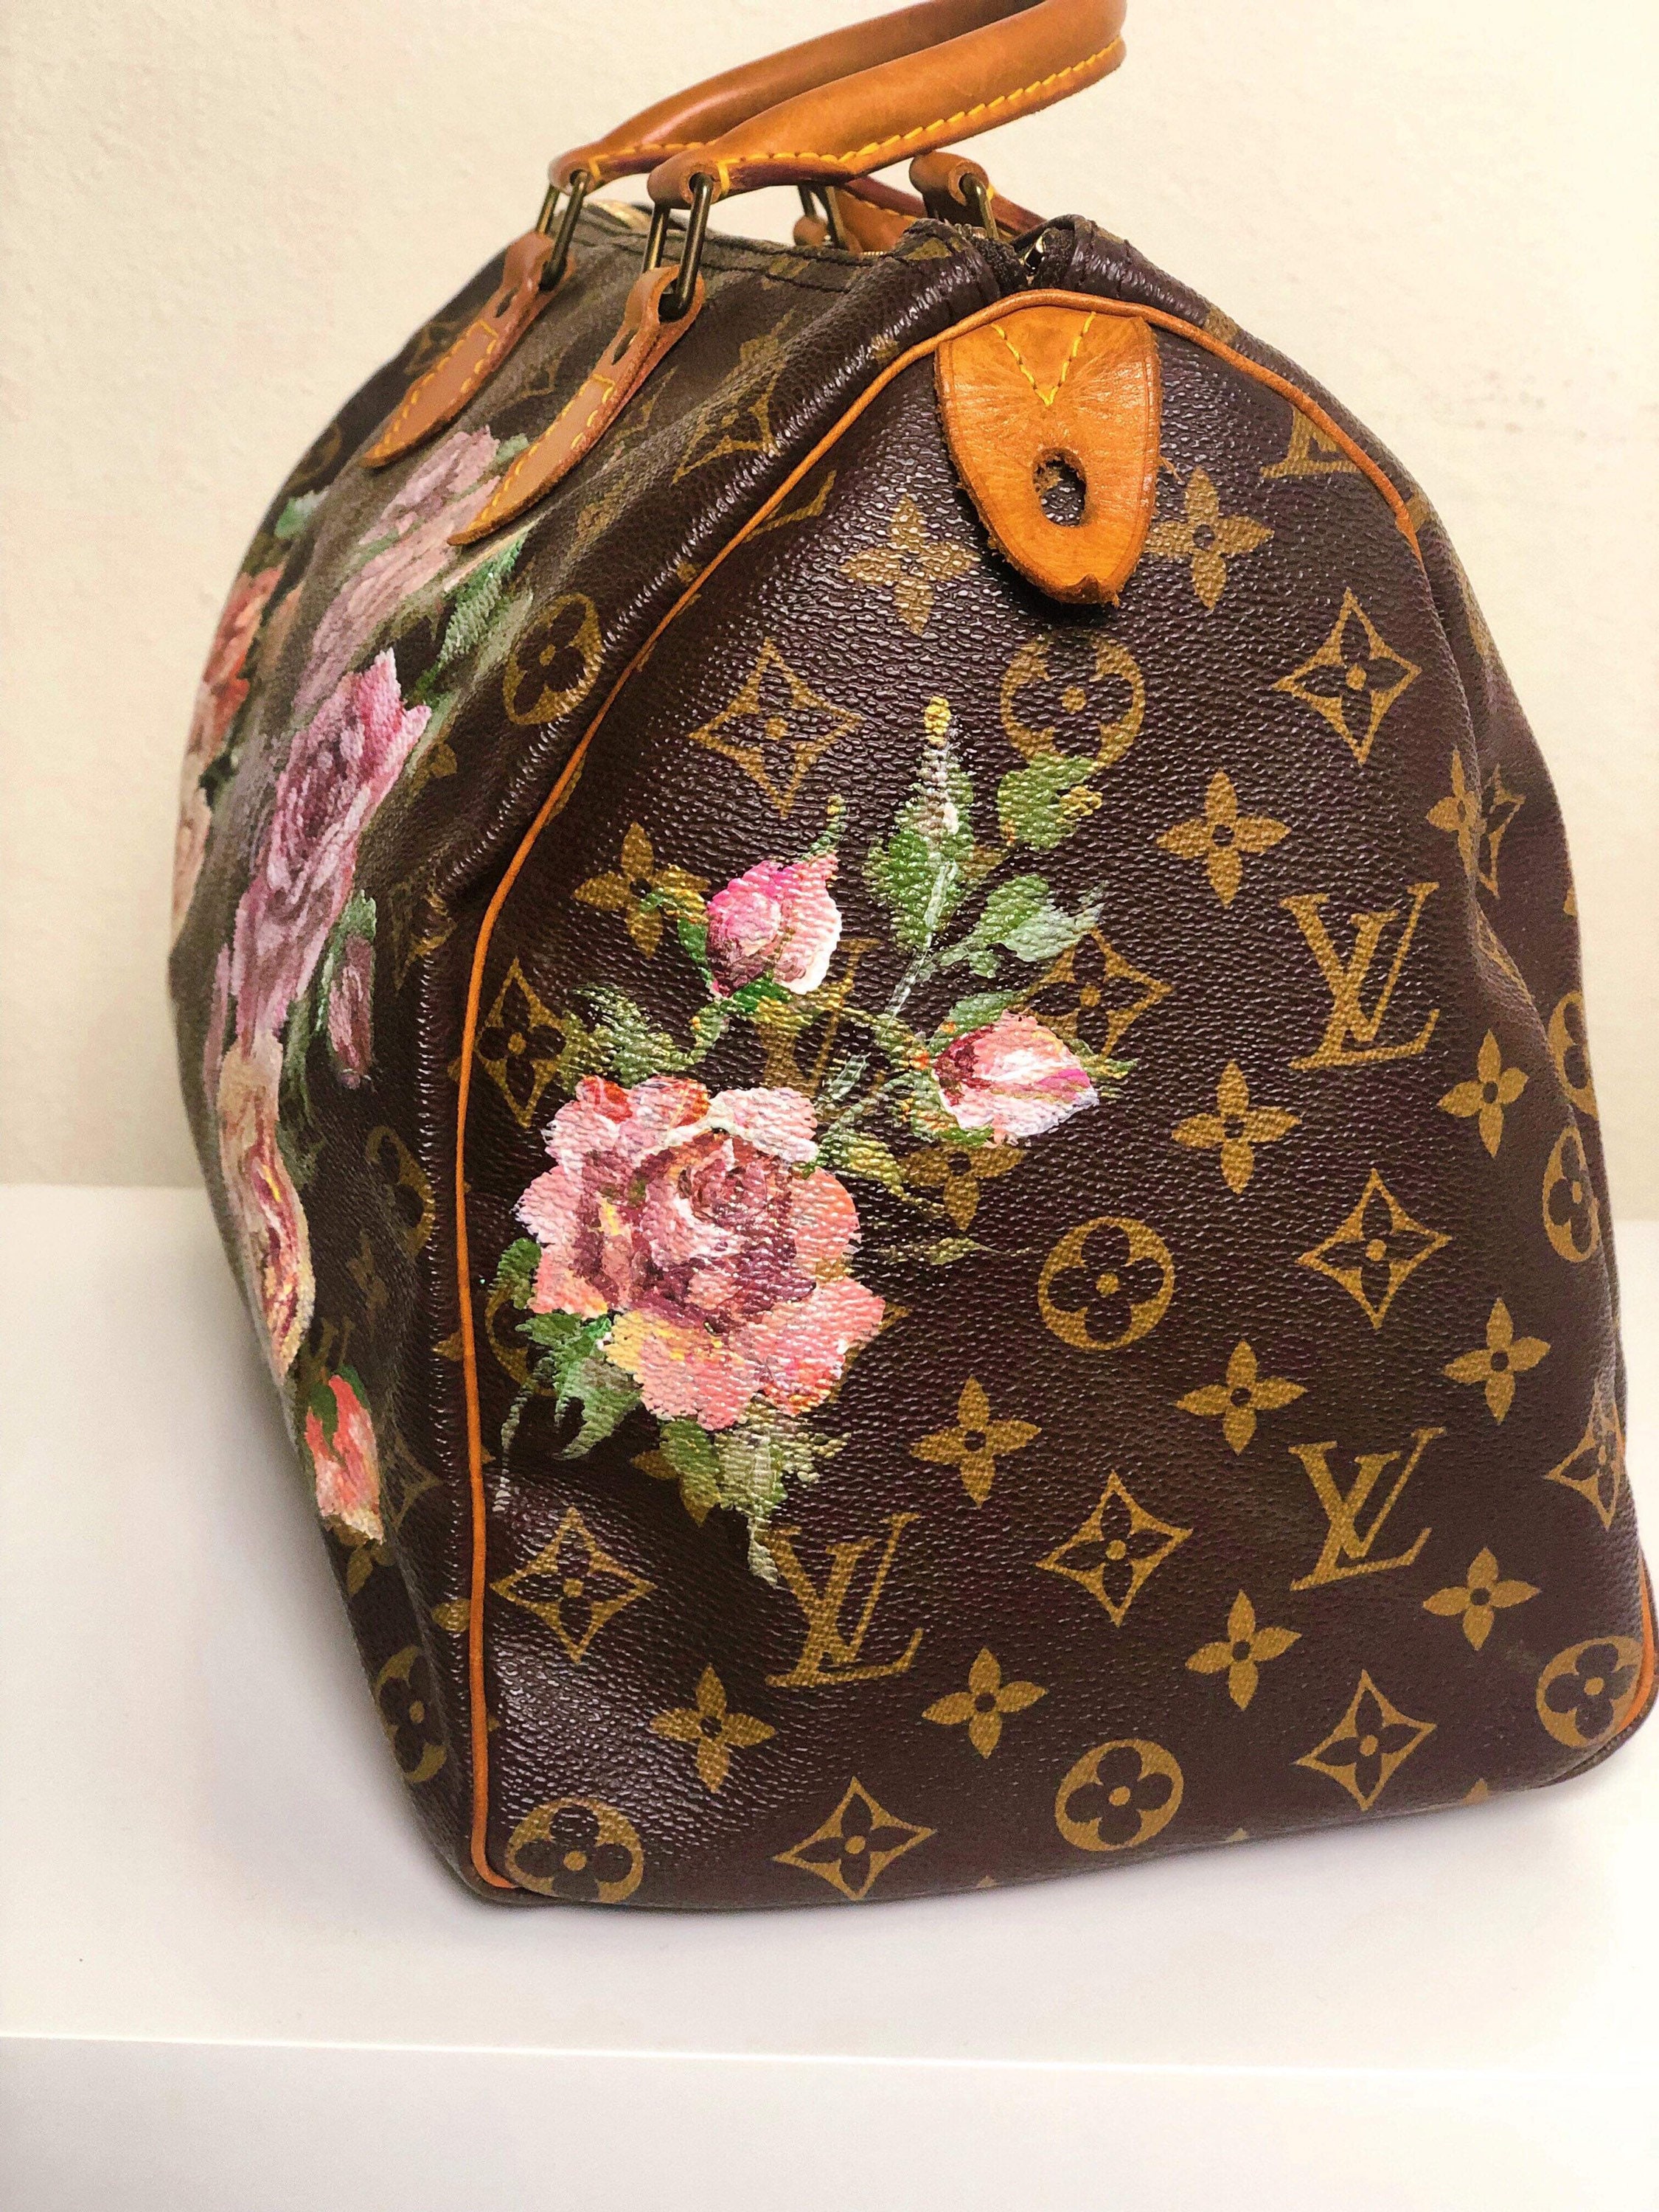 Custom Painting on LV or any branded bag. PF only. Bag not included- Send  in your bag for painting. Custom Painted Bag. Painted Bag.